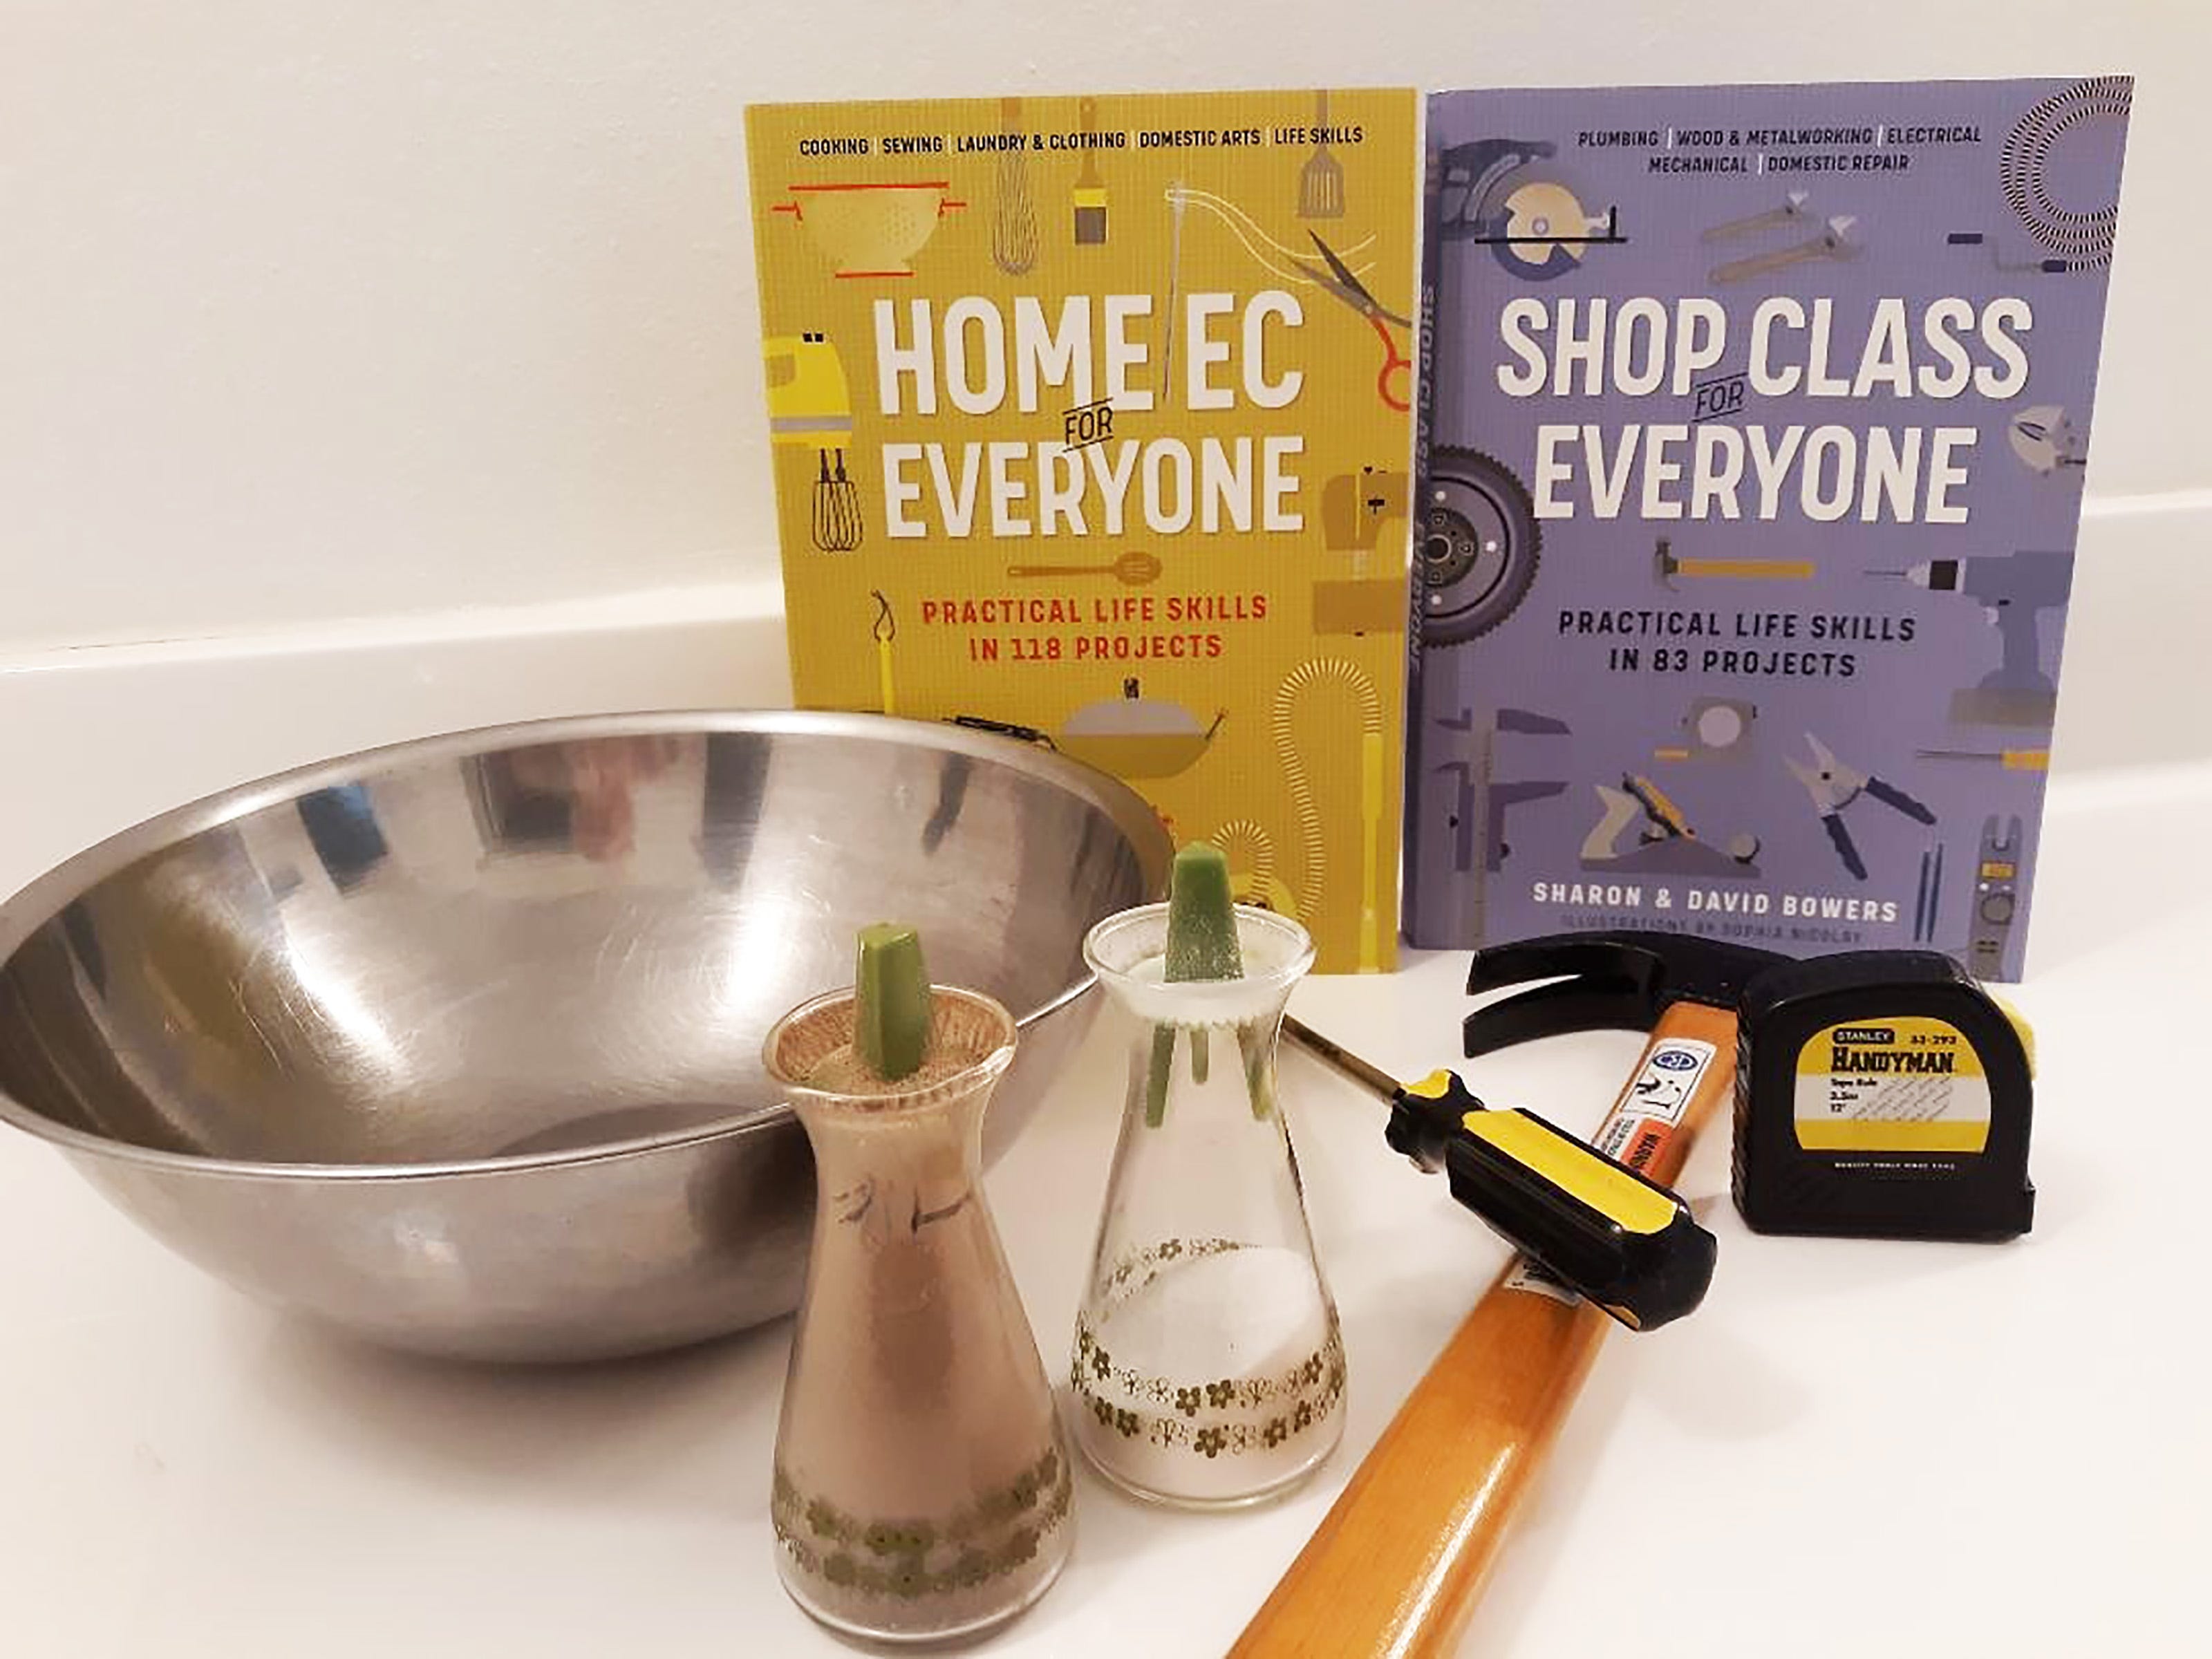 "Home Ec for Everyone" and "Shop Class for Everyone," both by Sharon & David Bowers, illustrated by Sophia Nicolay.